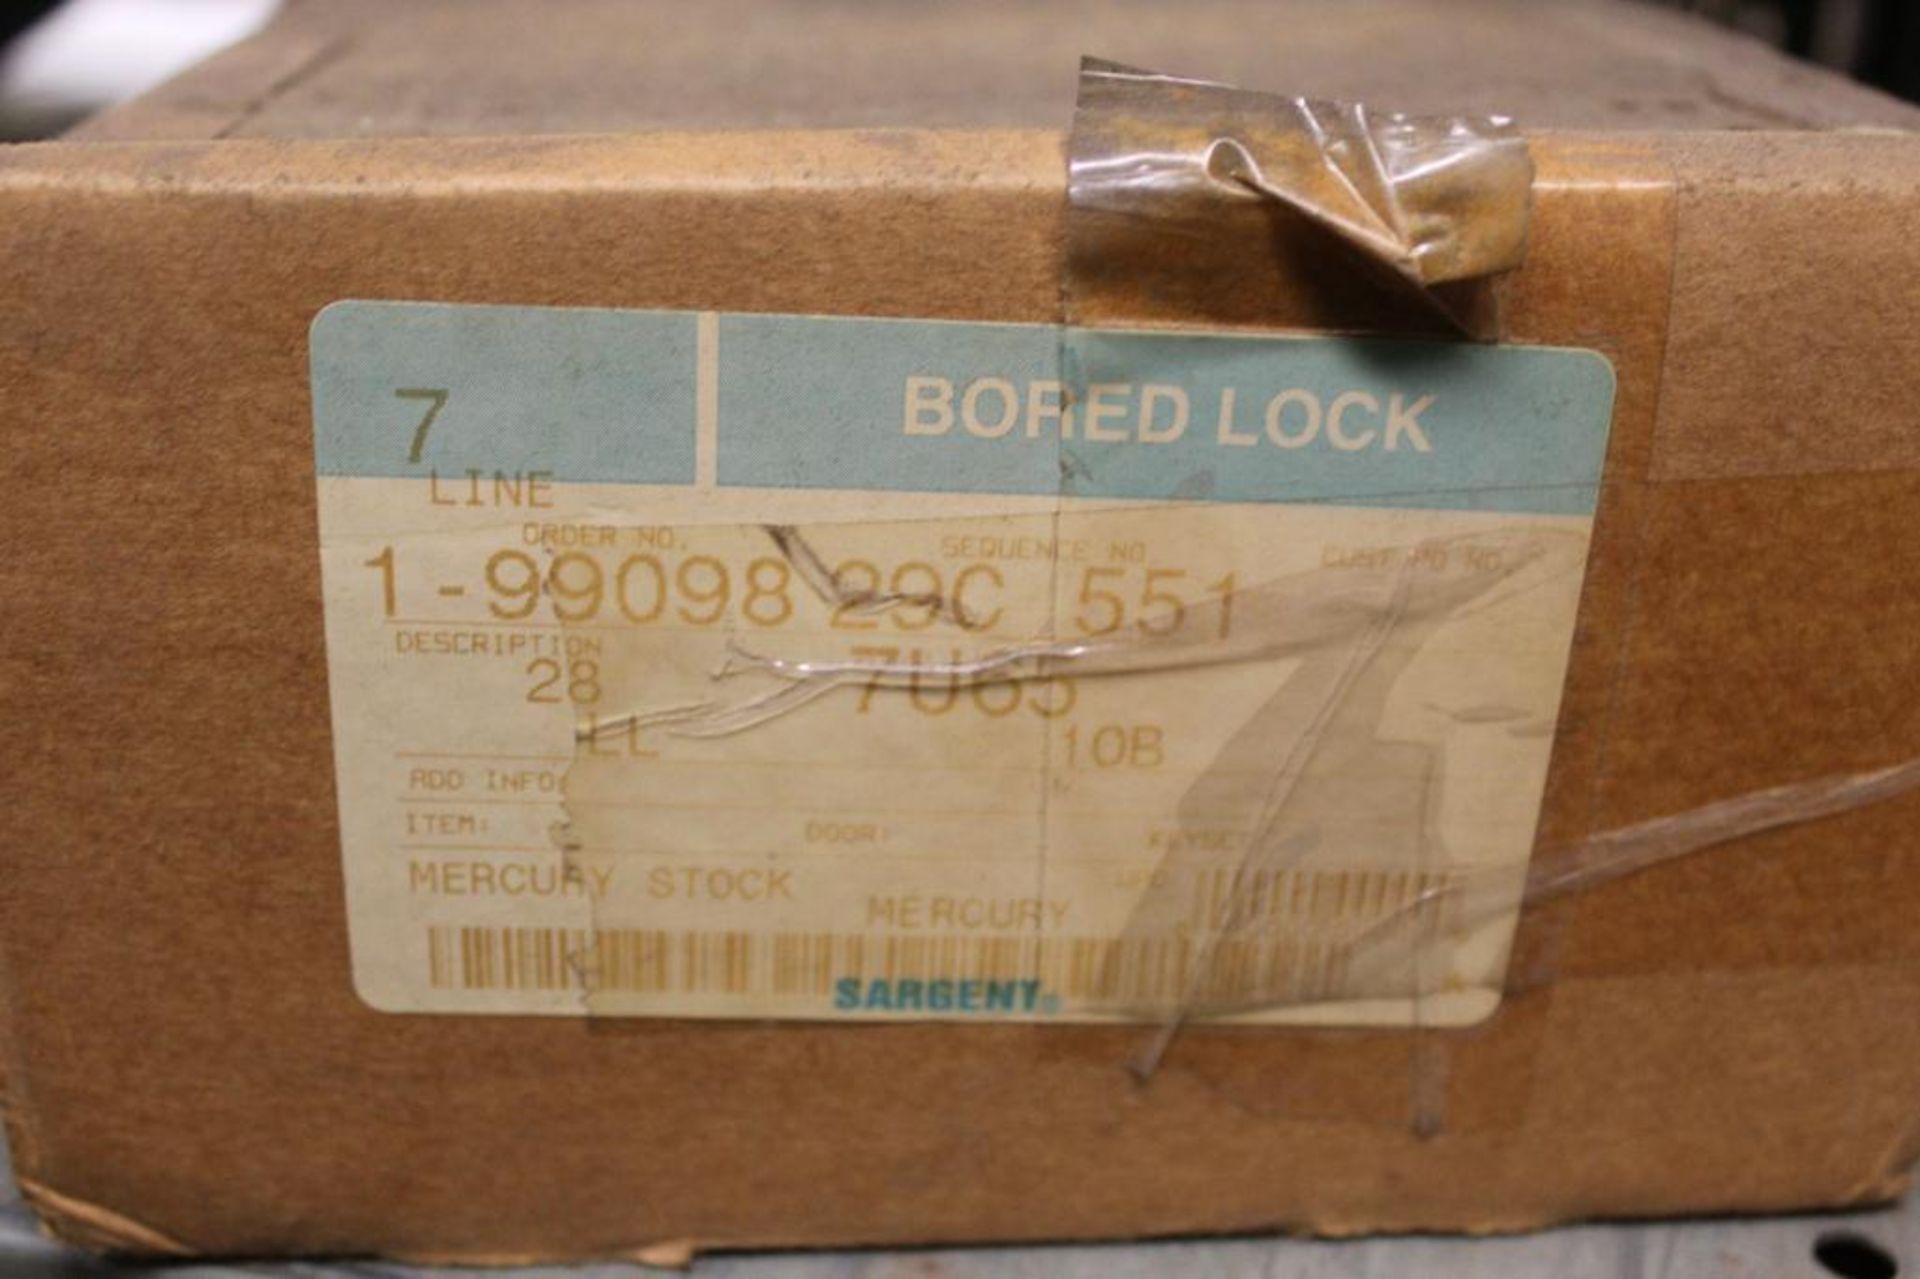 Lot of (7) Sargent Cylindrical Locks and (1) Sargent Bored Lock - Image 9 of 10